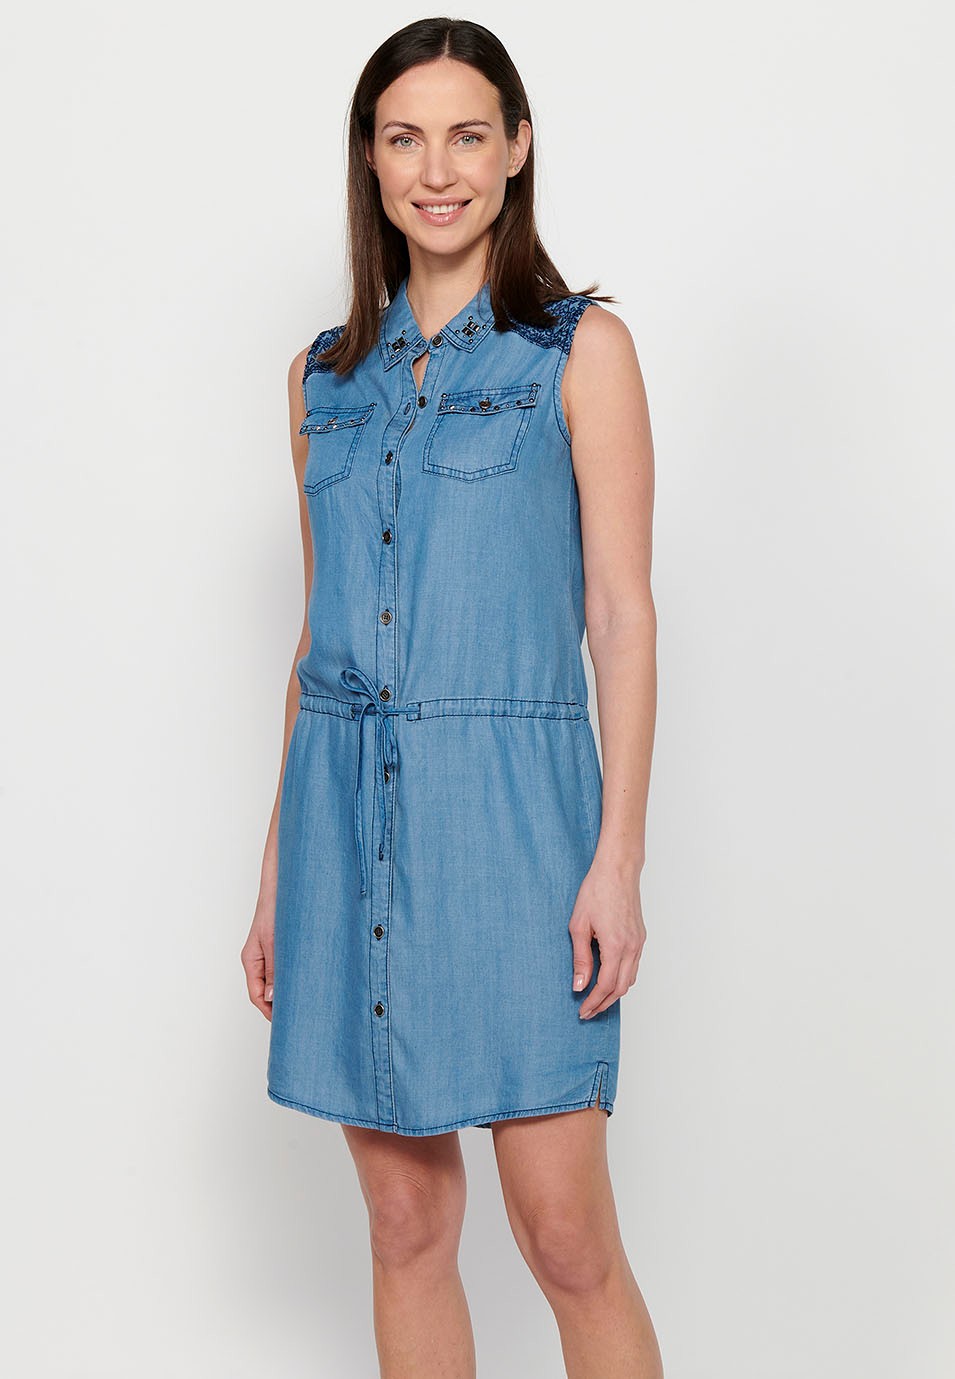 Sleeveless midi dress with front closure with buttons and embroidered details, tight at the waist in Blue for Women 3